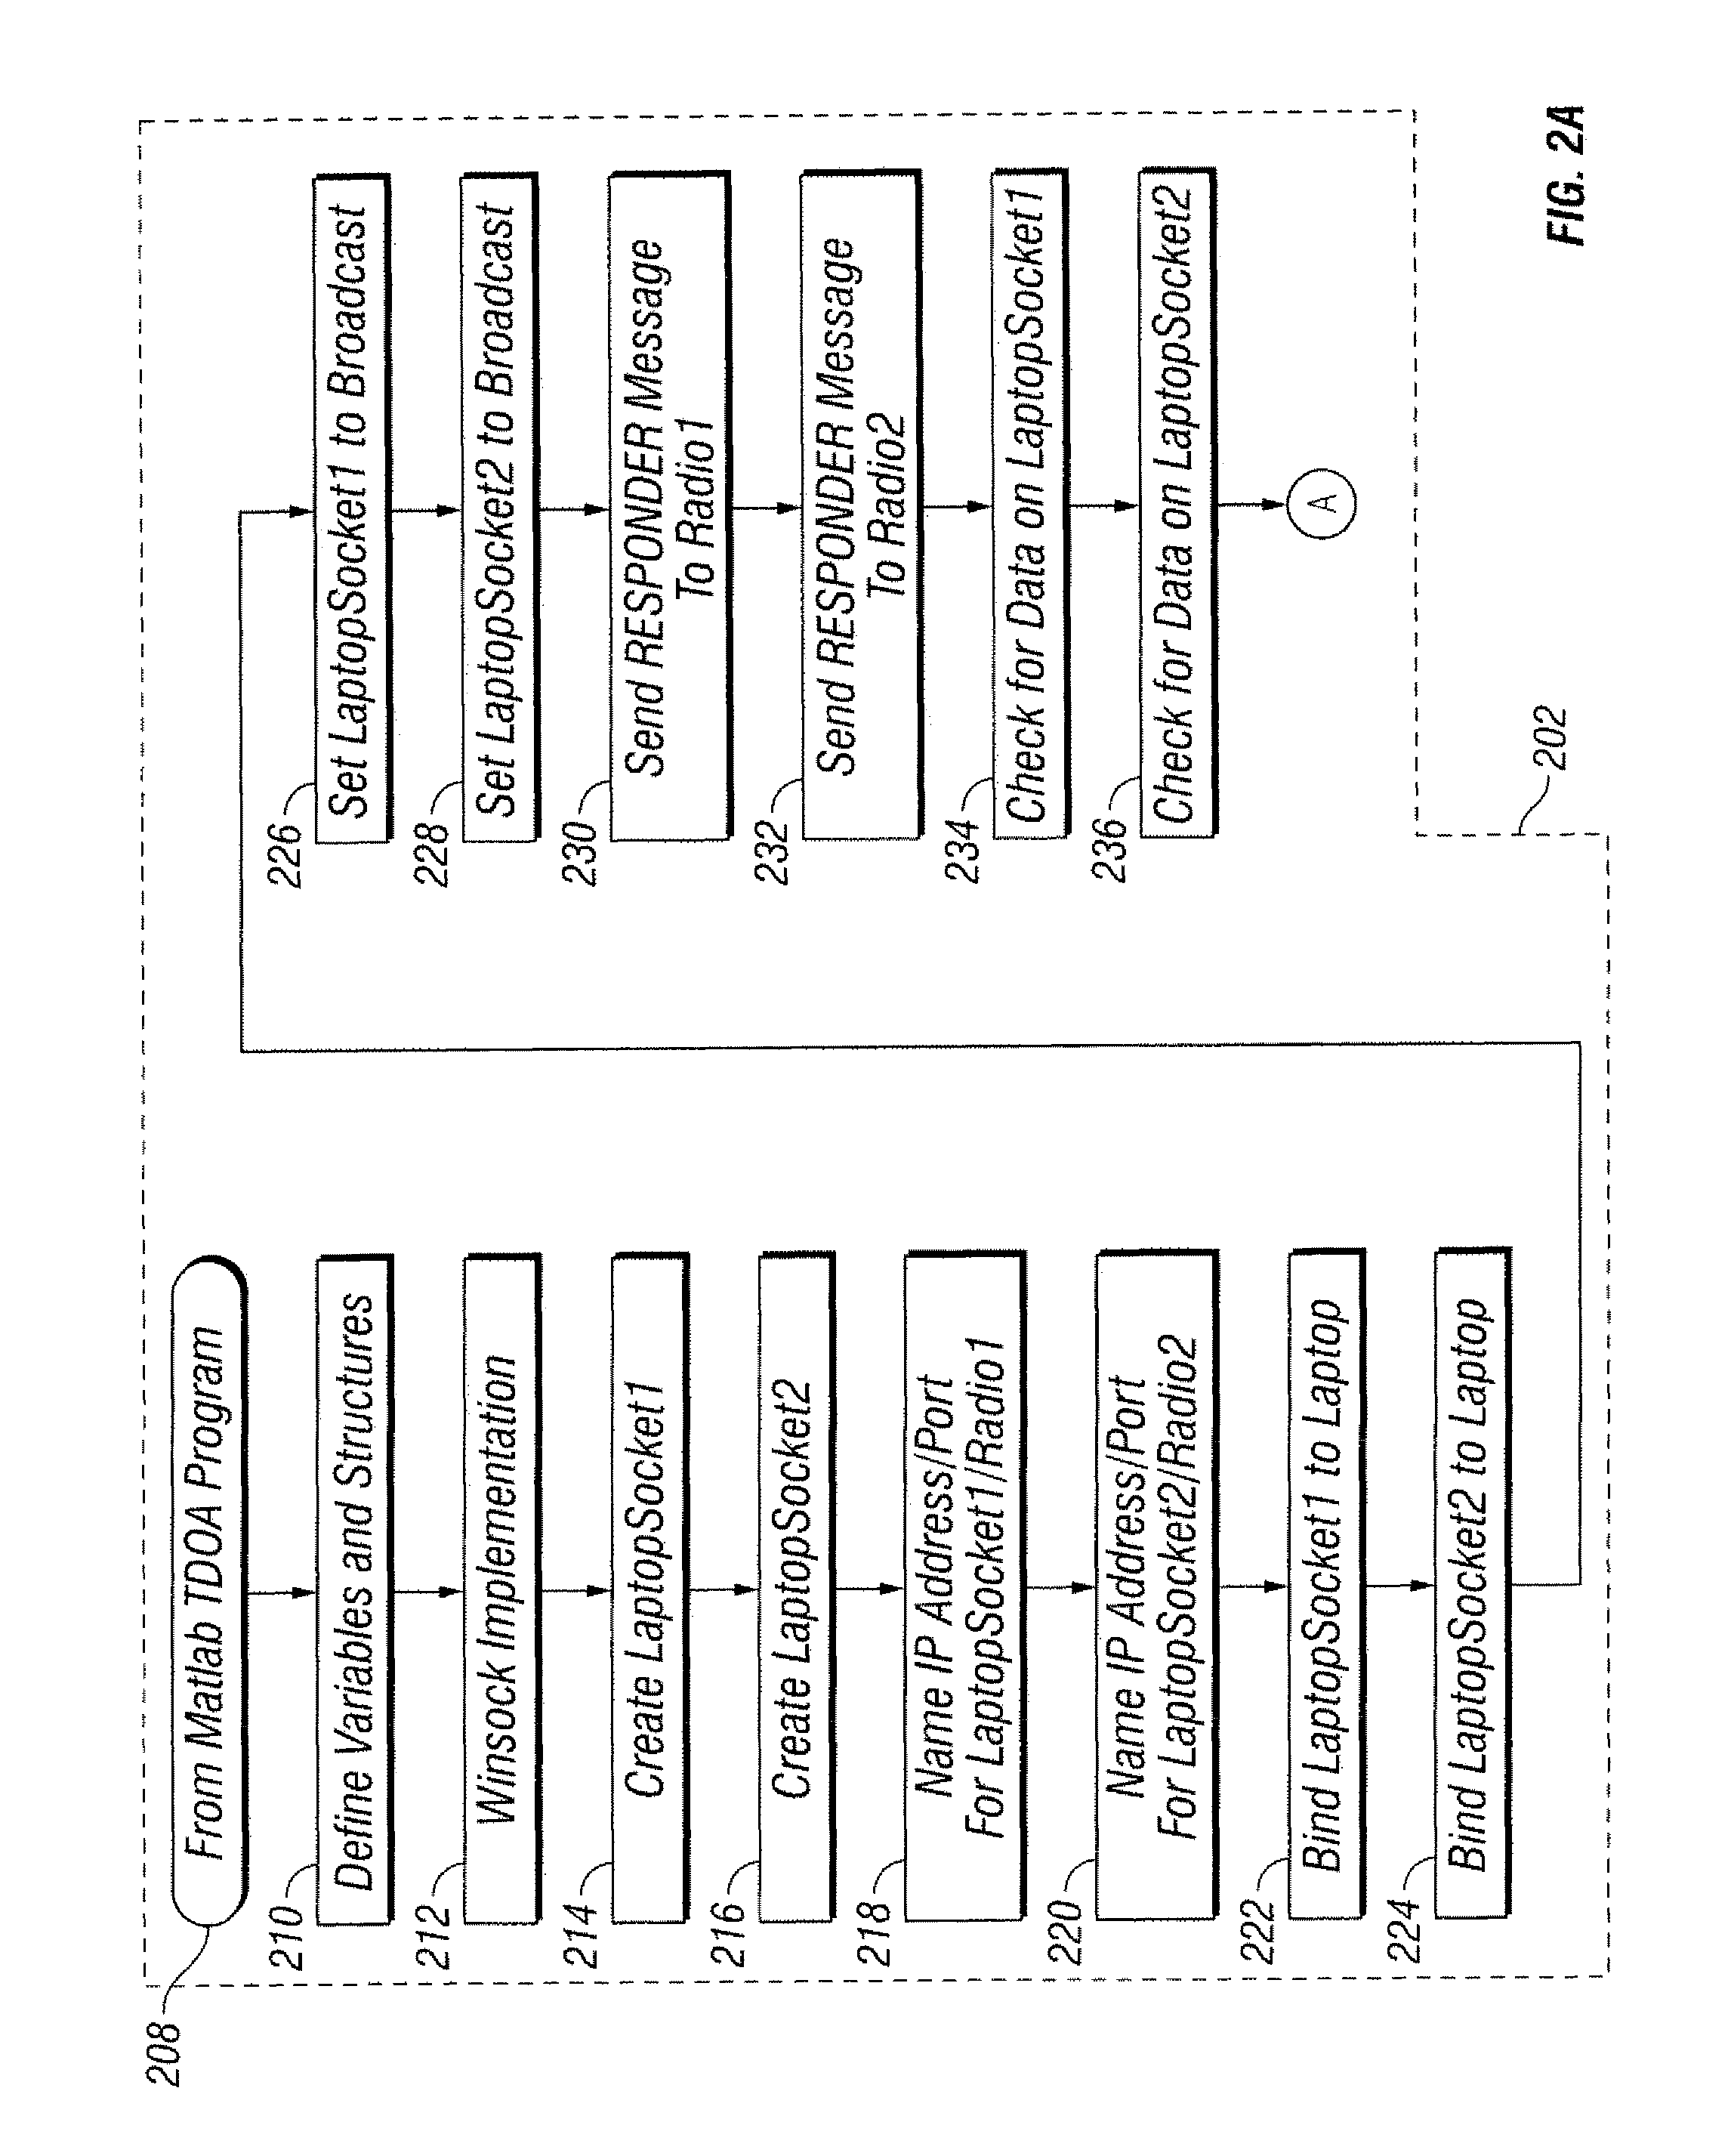 Ultrawideband asynchronous tracking system and method